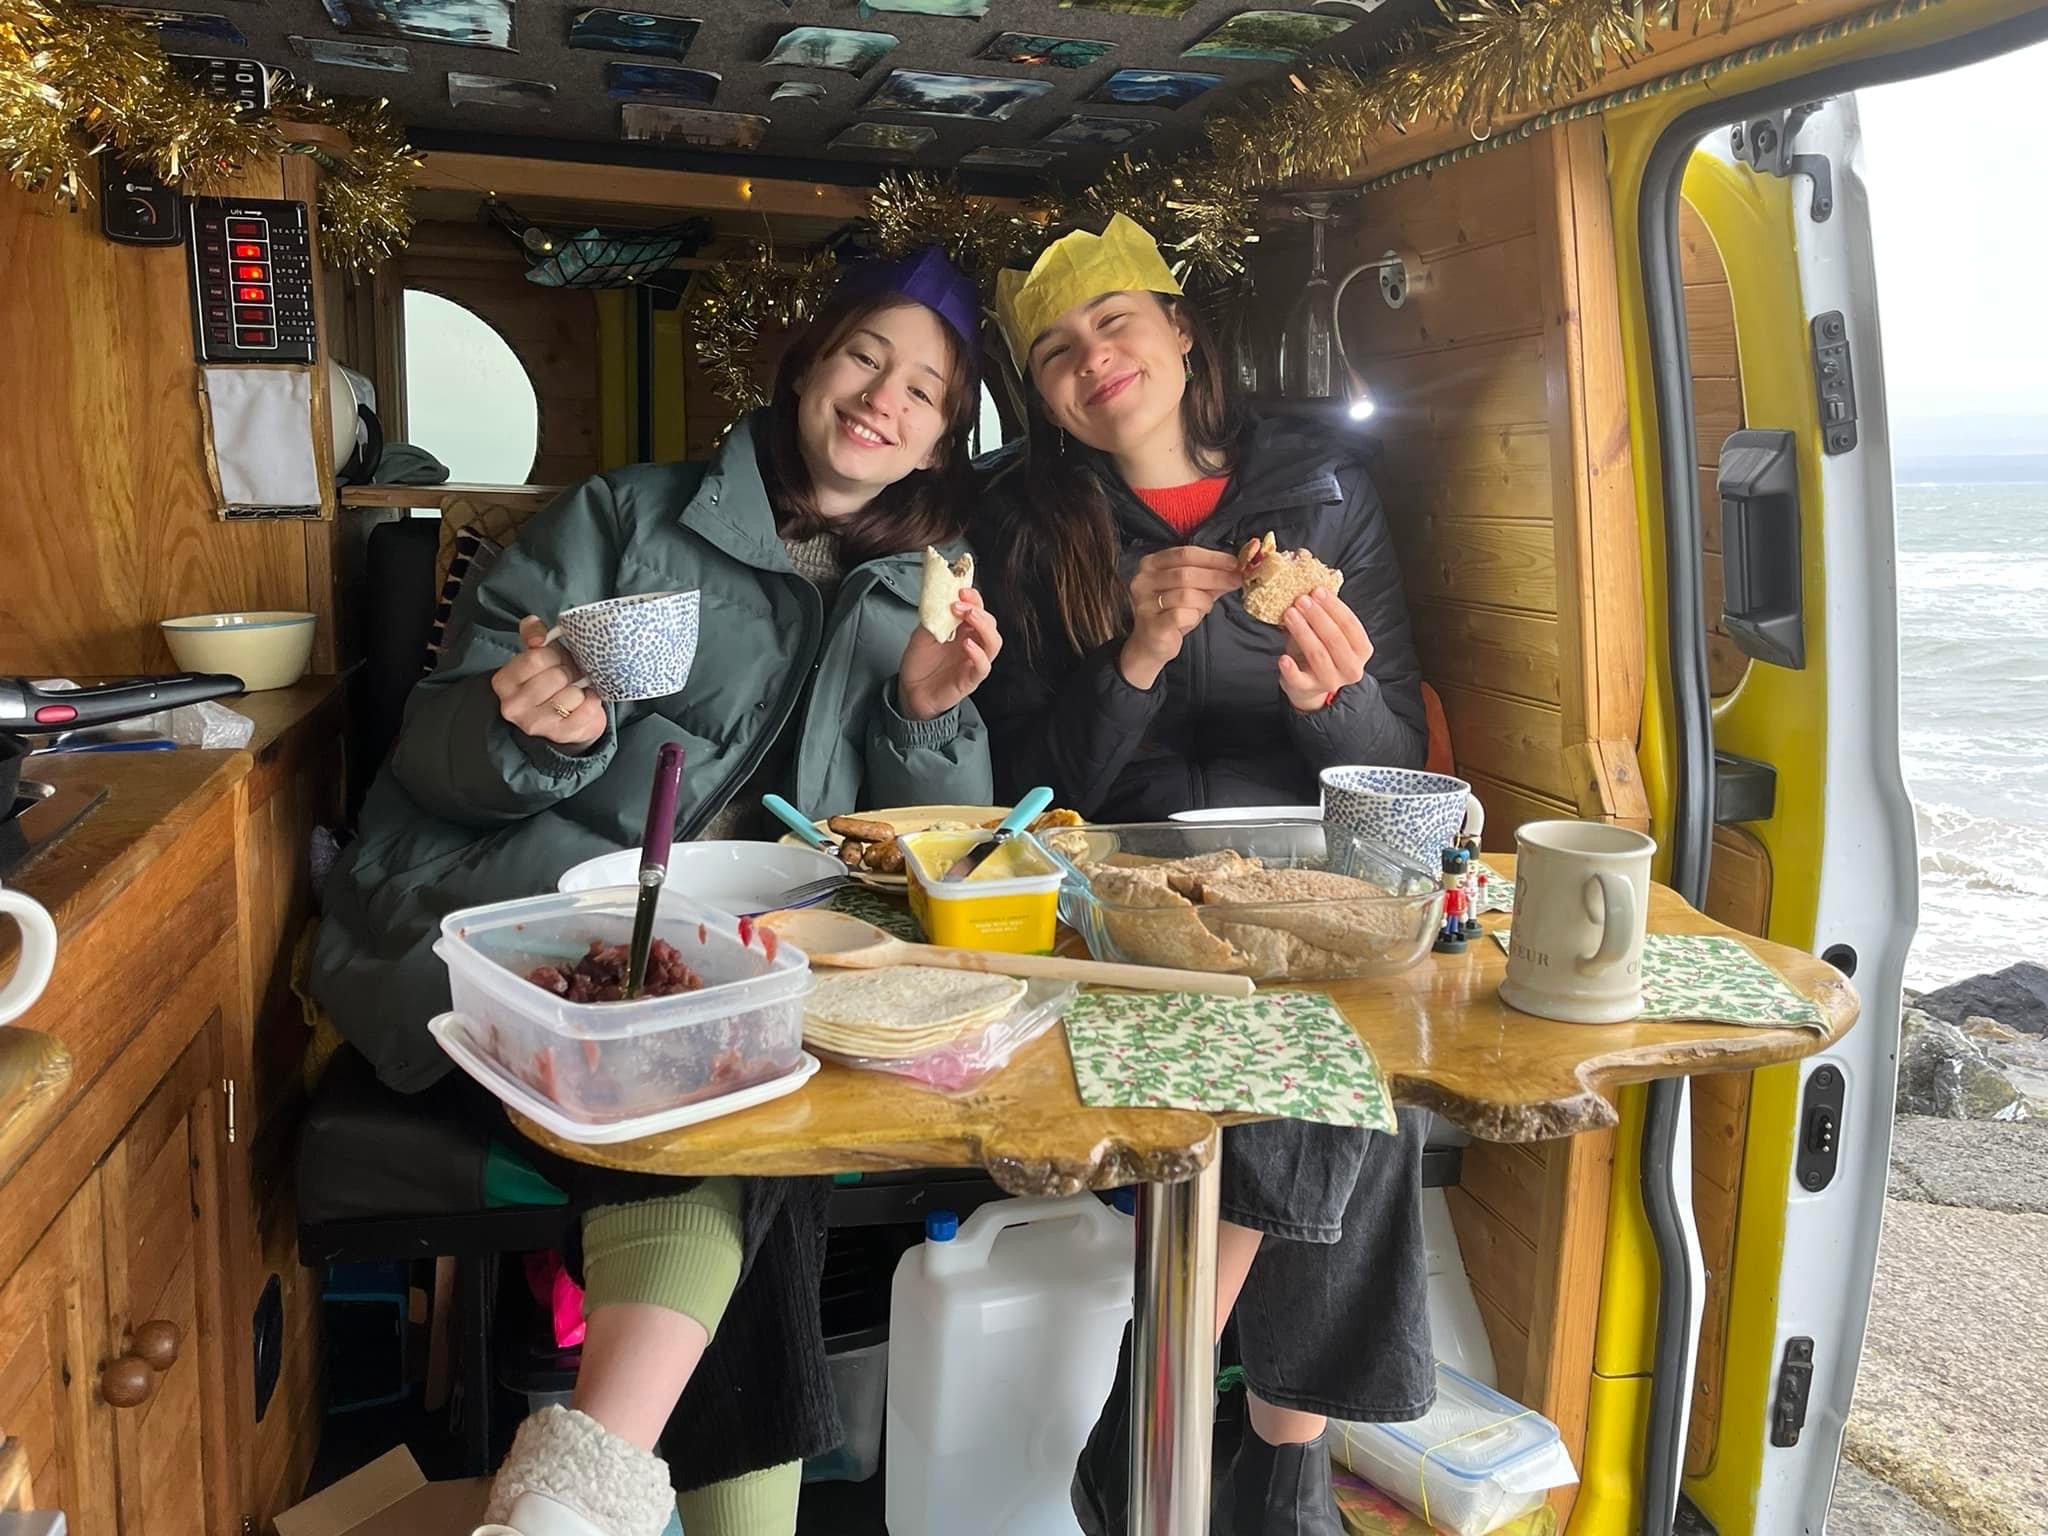 Two women sit inside a cozy, brightly decorated van by the seaside, smiling and enjoying a meal. They both wear colorful paper crowns and hold mugs and food. The van has wooden paneling, festive tinsel, and various containers of food on a small table. The ocean and rocks are visible outside.